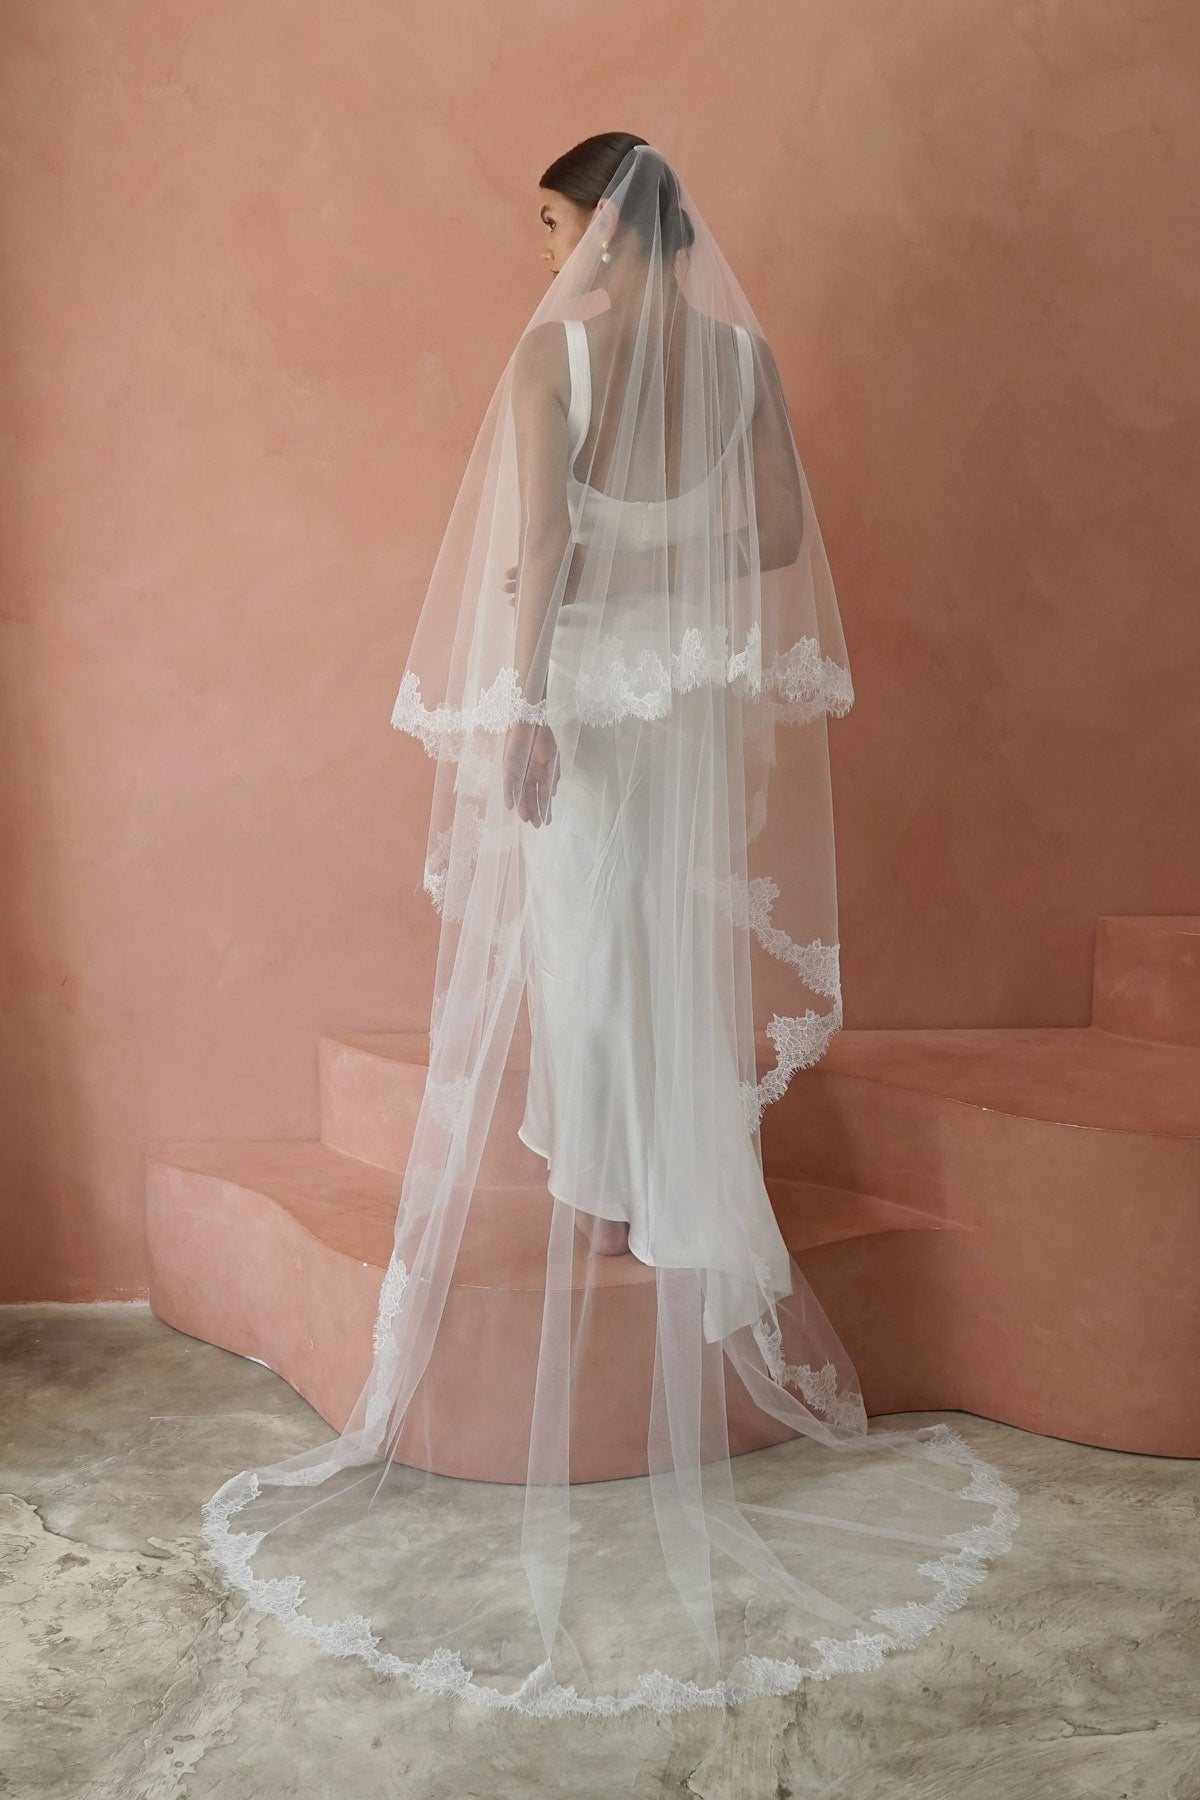 A model wearing CELINE II, a two tier lace wedding veil by Madame Tulle